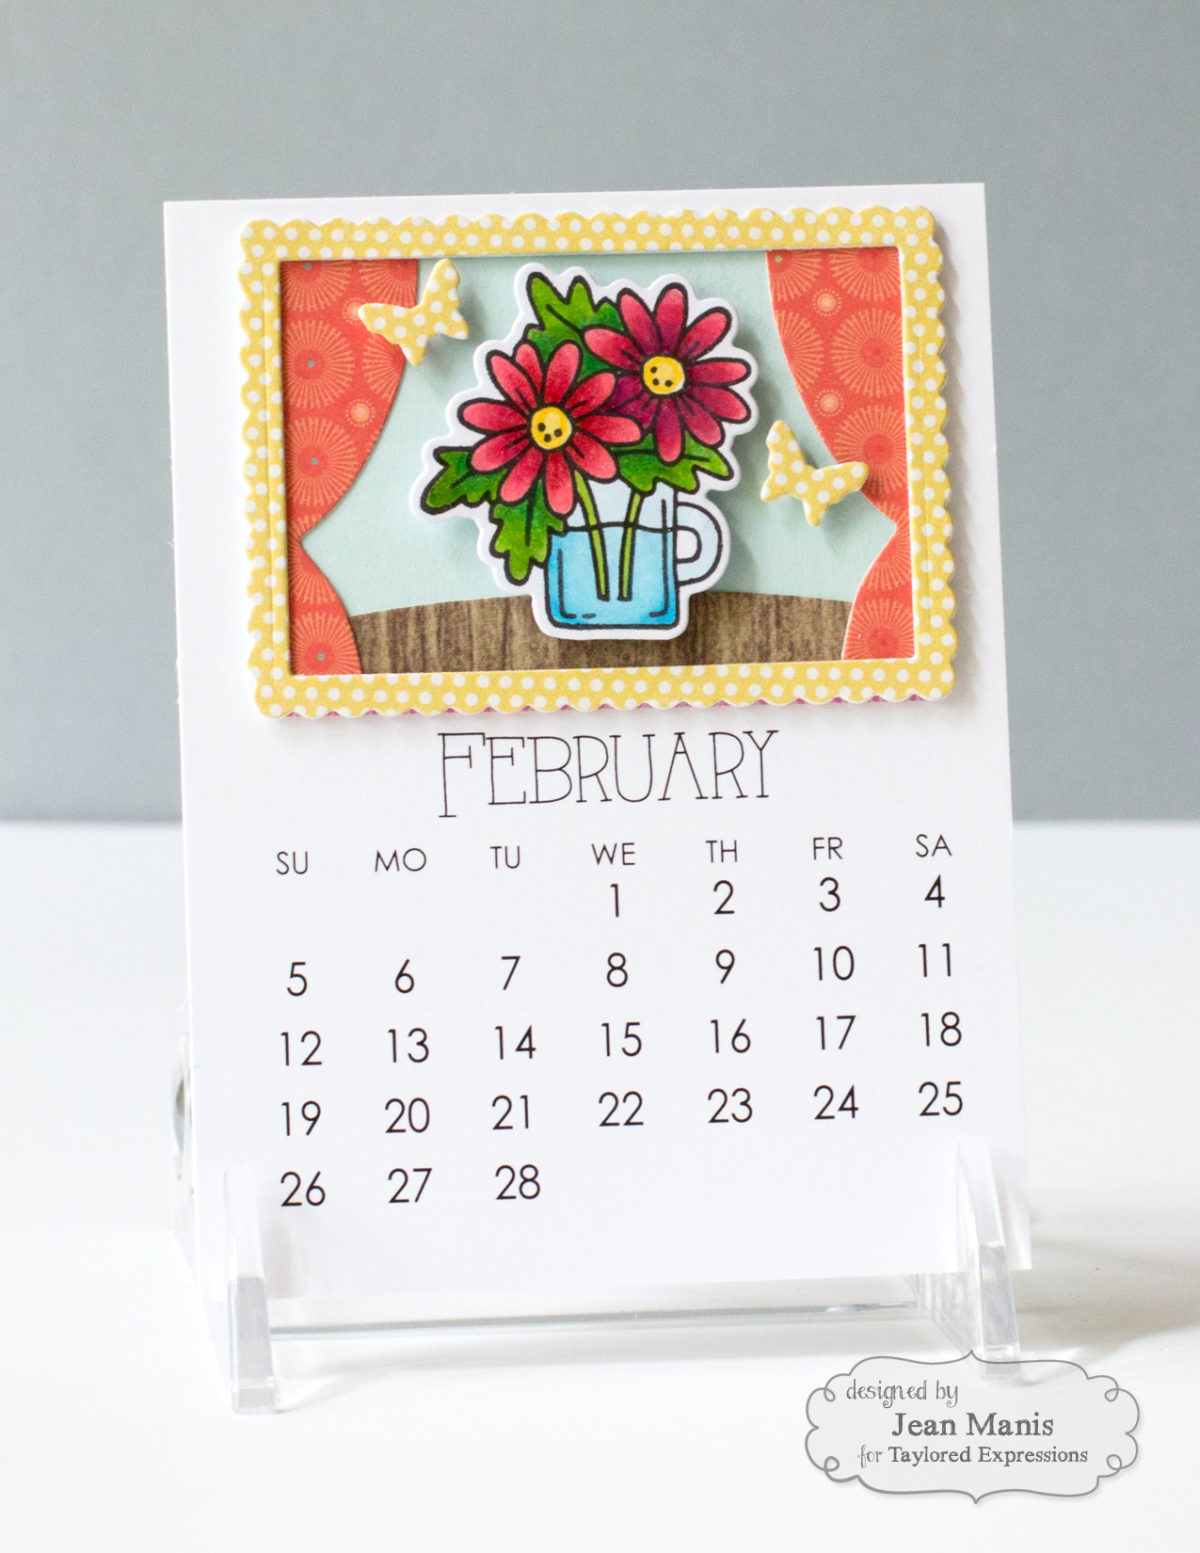 Taylored Expressions – February 2017 Calendar